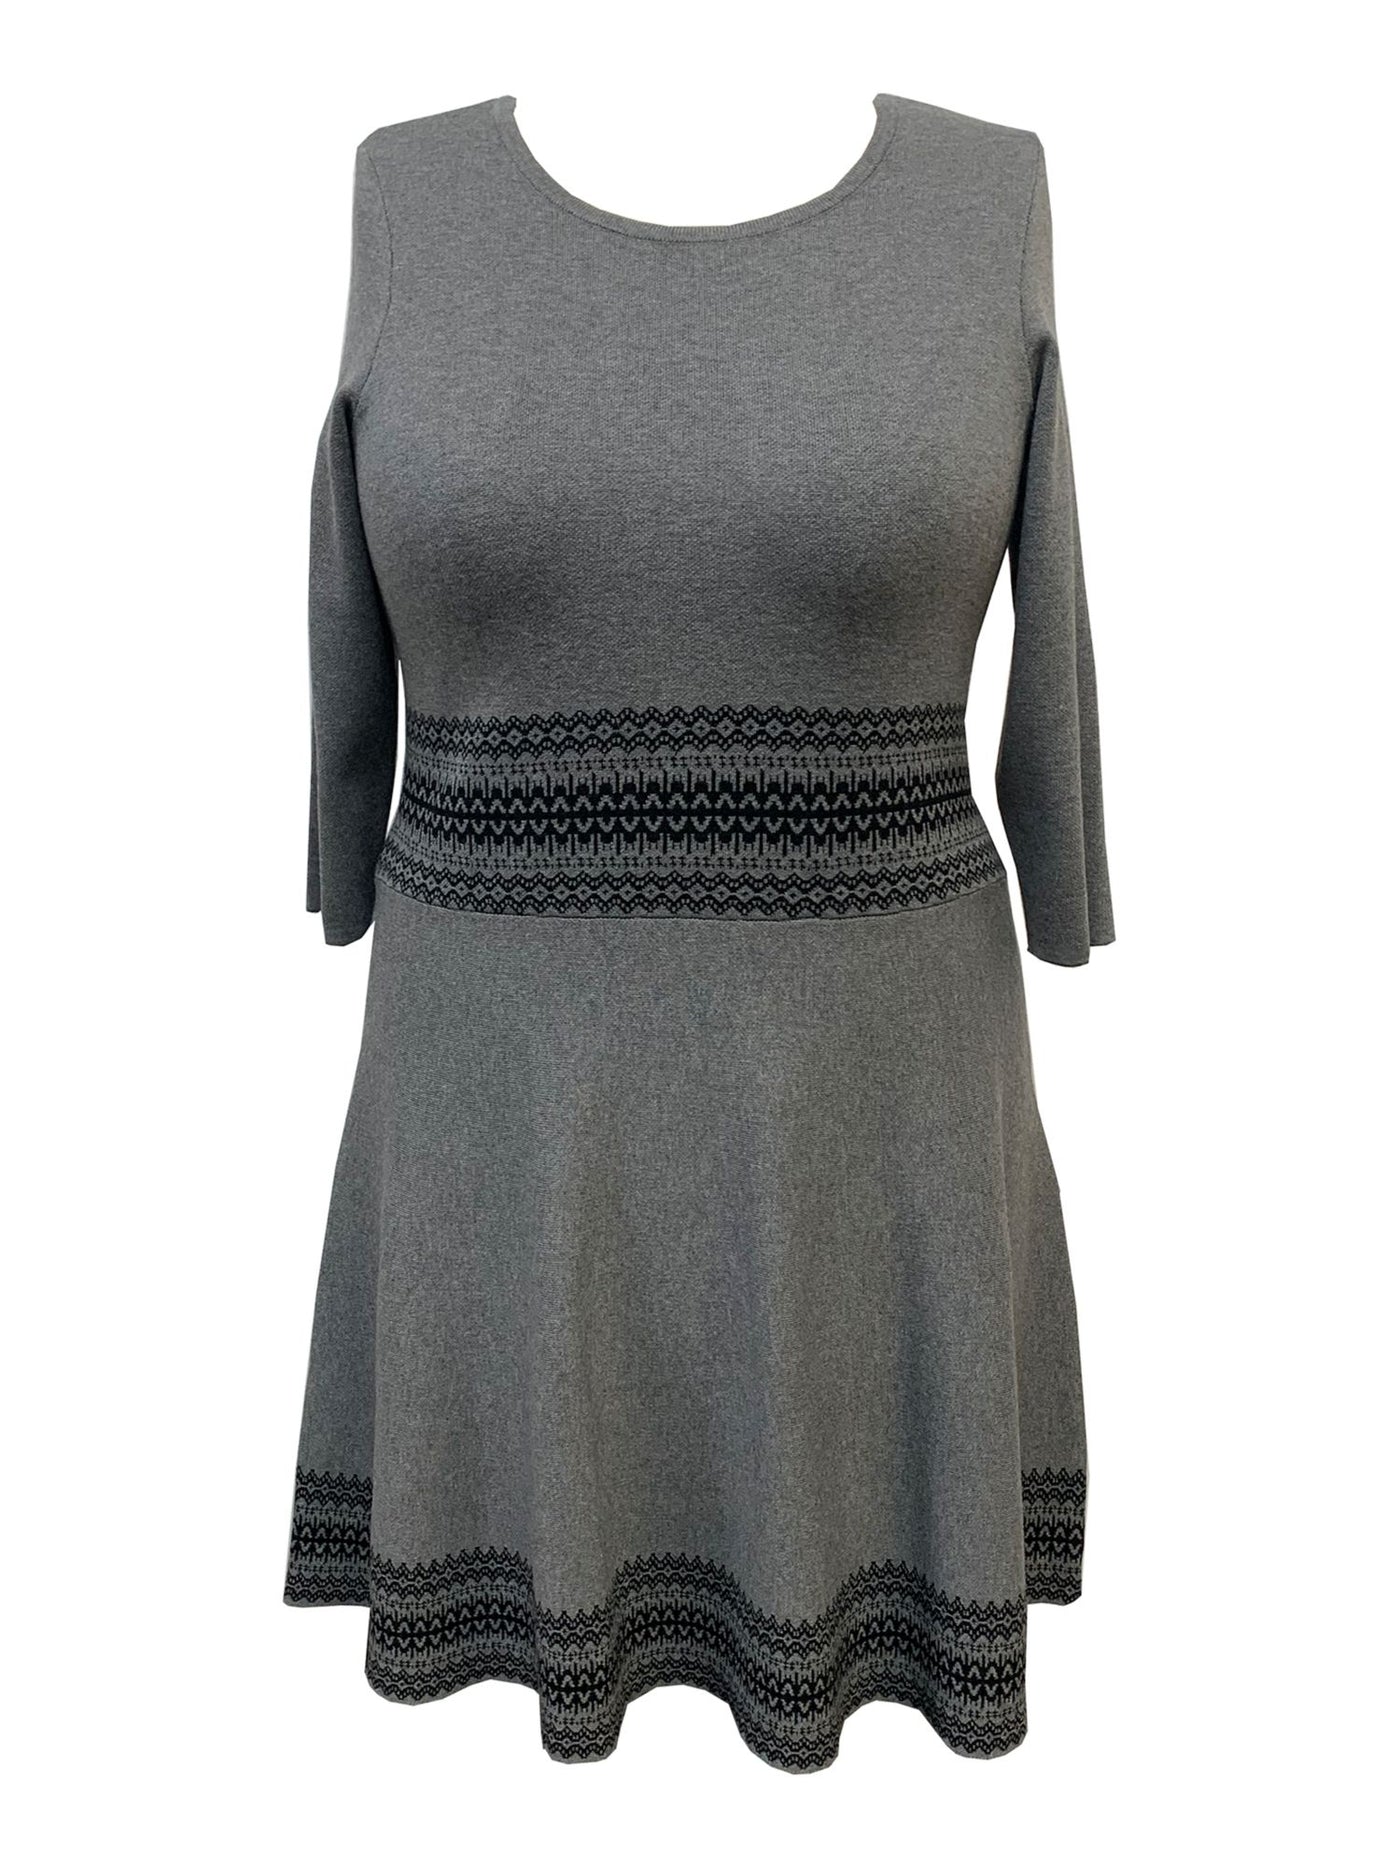 TAYLOR Womens Gray Knit Heather 3/4 Sleeve Jewel Neck Knee Length Wear To Work Fit + Flare Dress Plus 2X